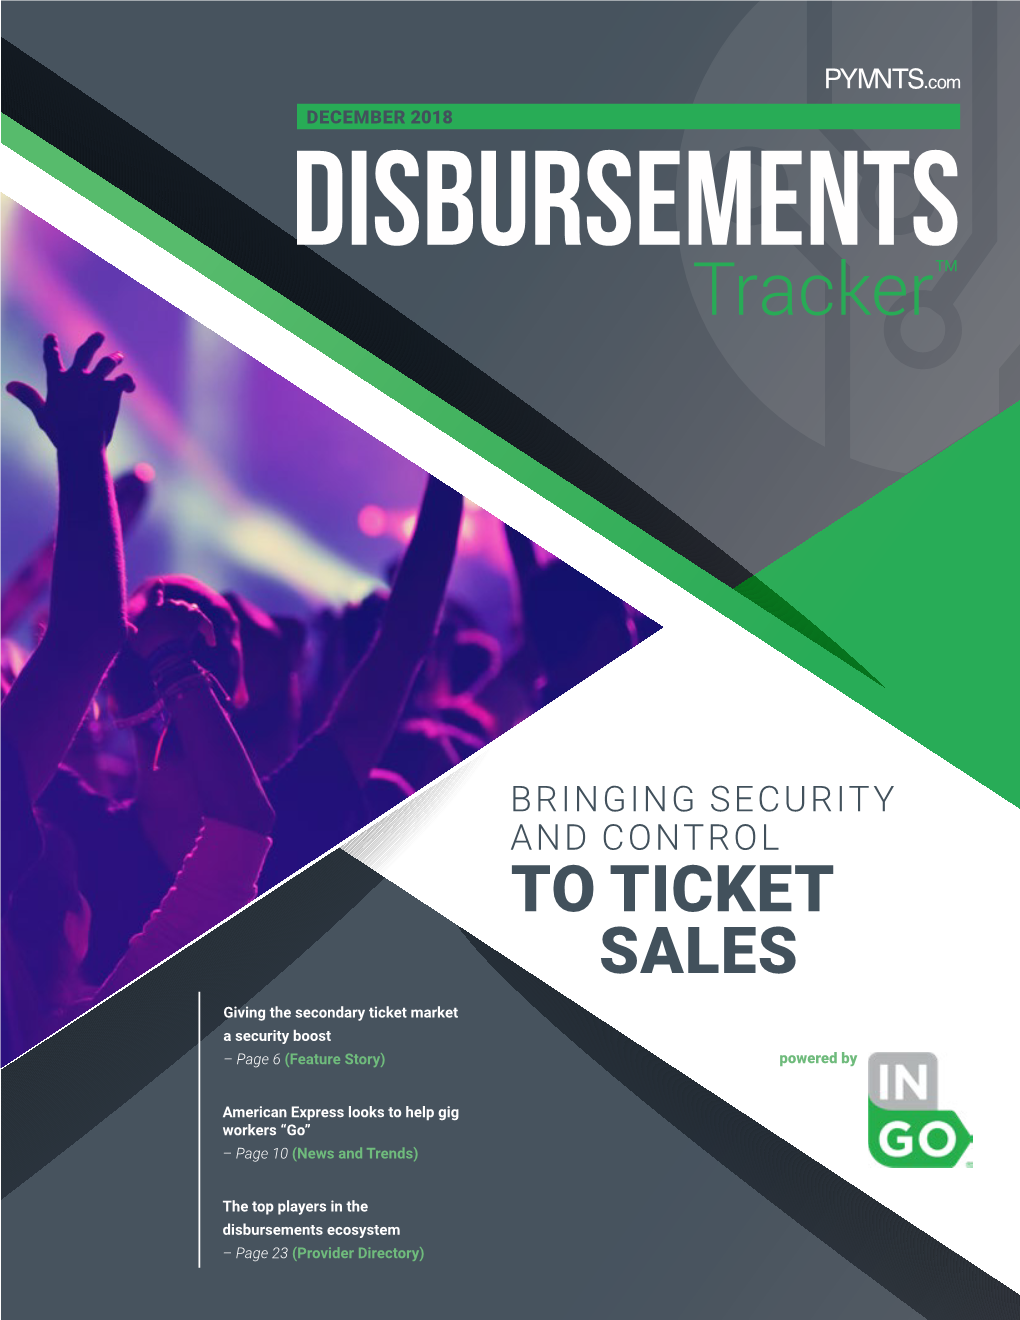 Bringing Security and Control to Ticket Sales